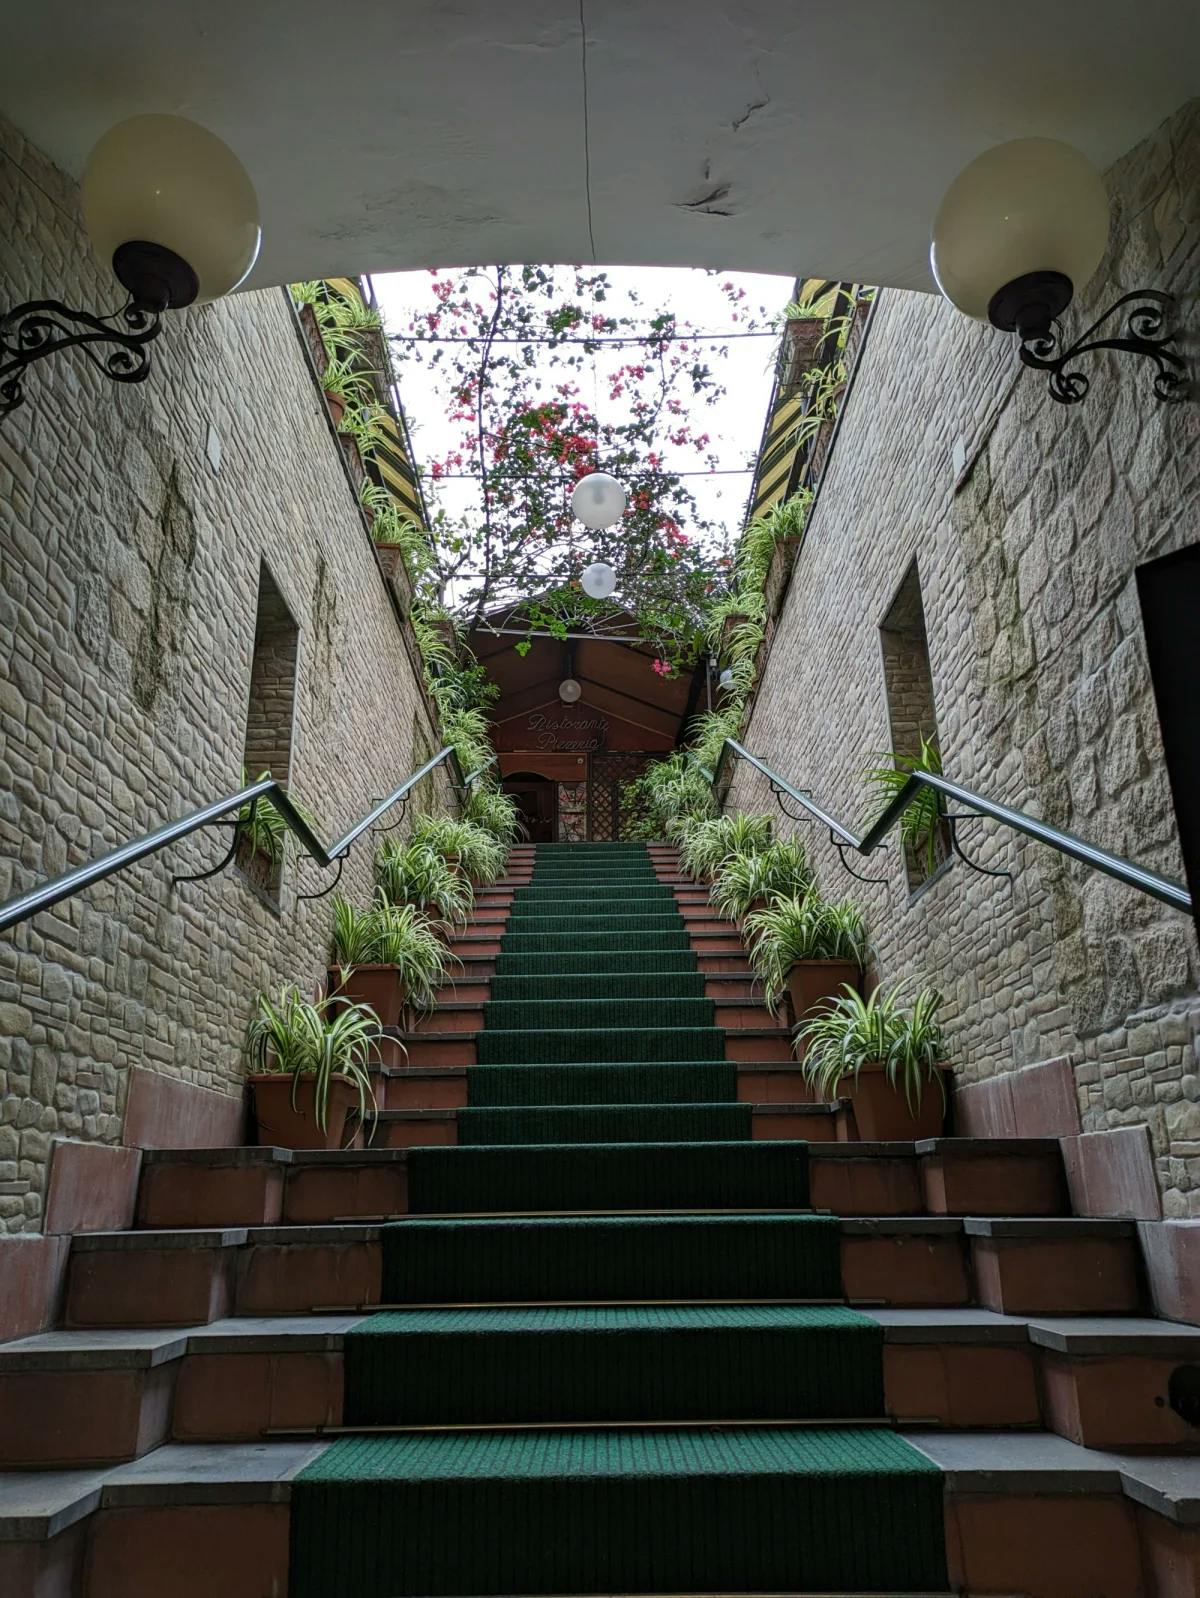 A photo of an outdoor staircase taken from the bottom